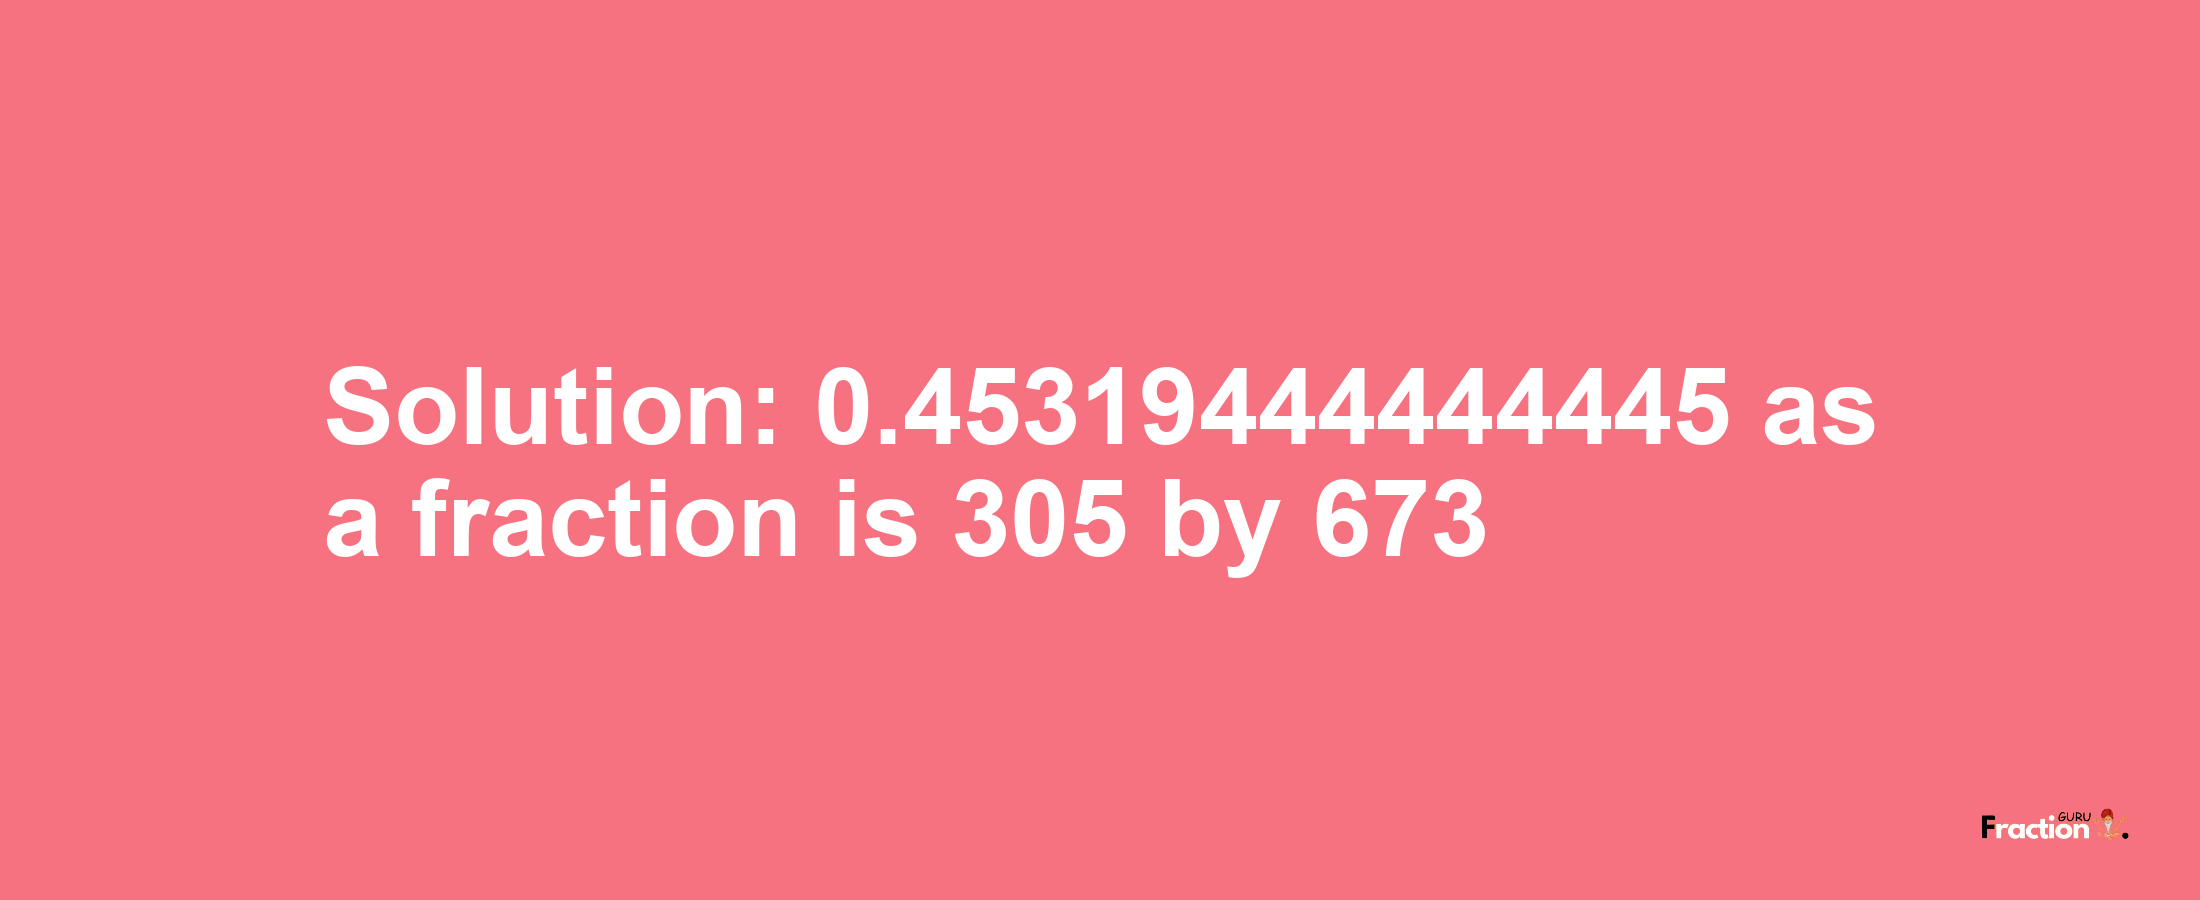 Solution:0.45319444444445 as a fraction is 305/673